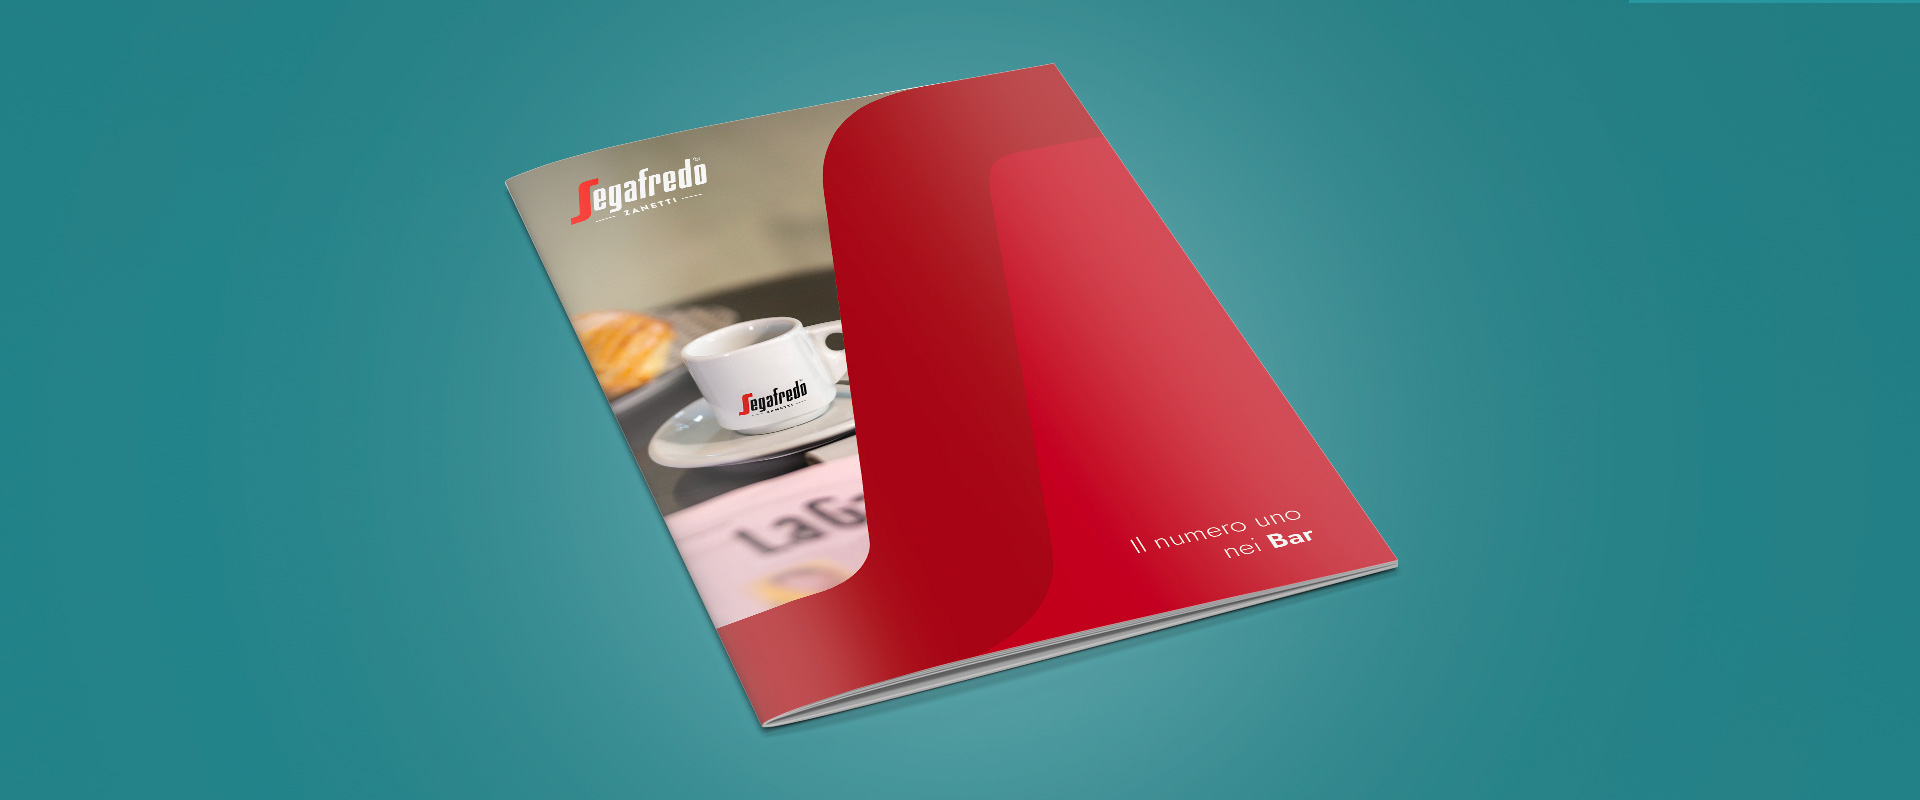 The Segafredo B2B paper toolkit created by ATC for the Ho.Re.Ca. channel includes a brochure and catalogs for the different sales channels